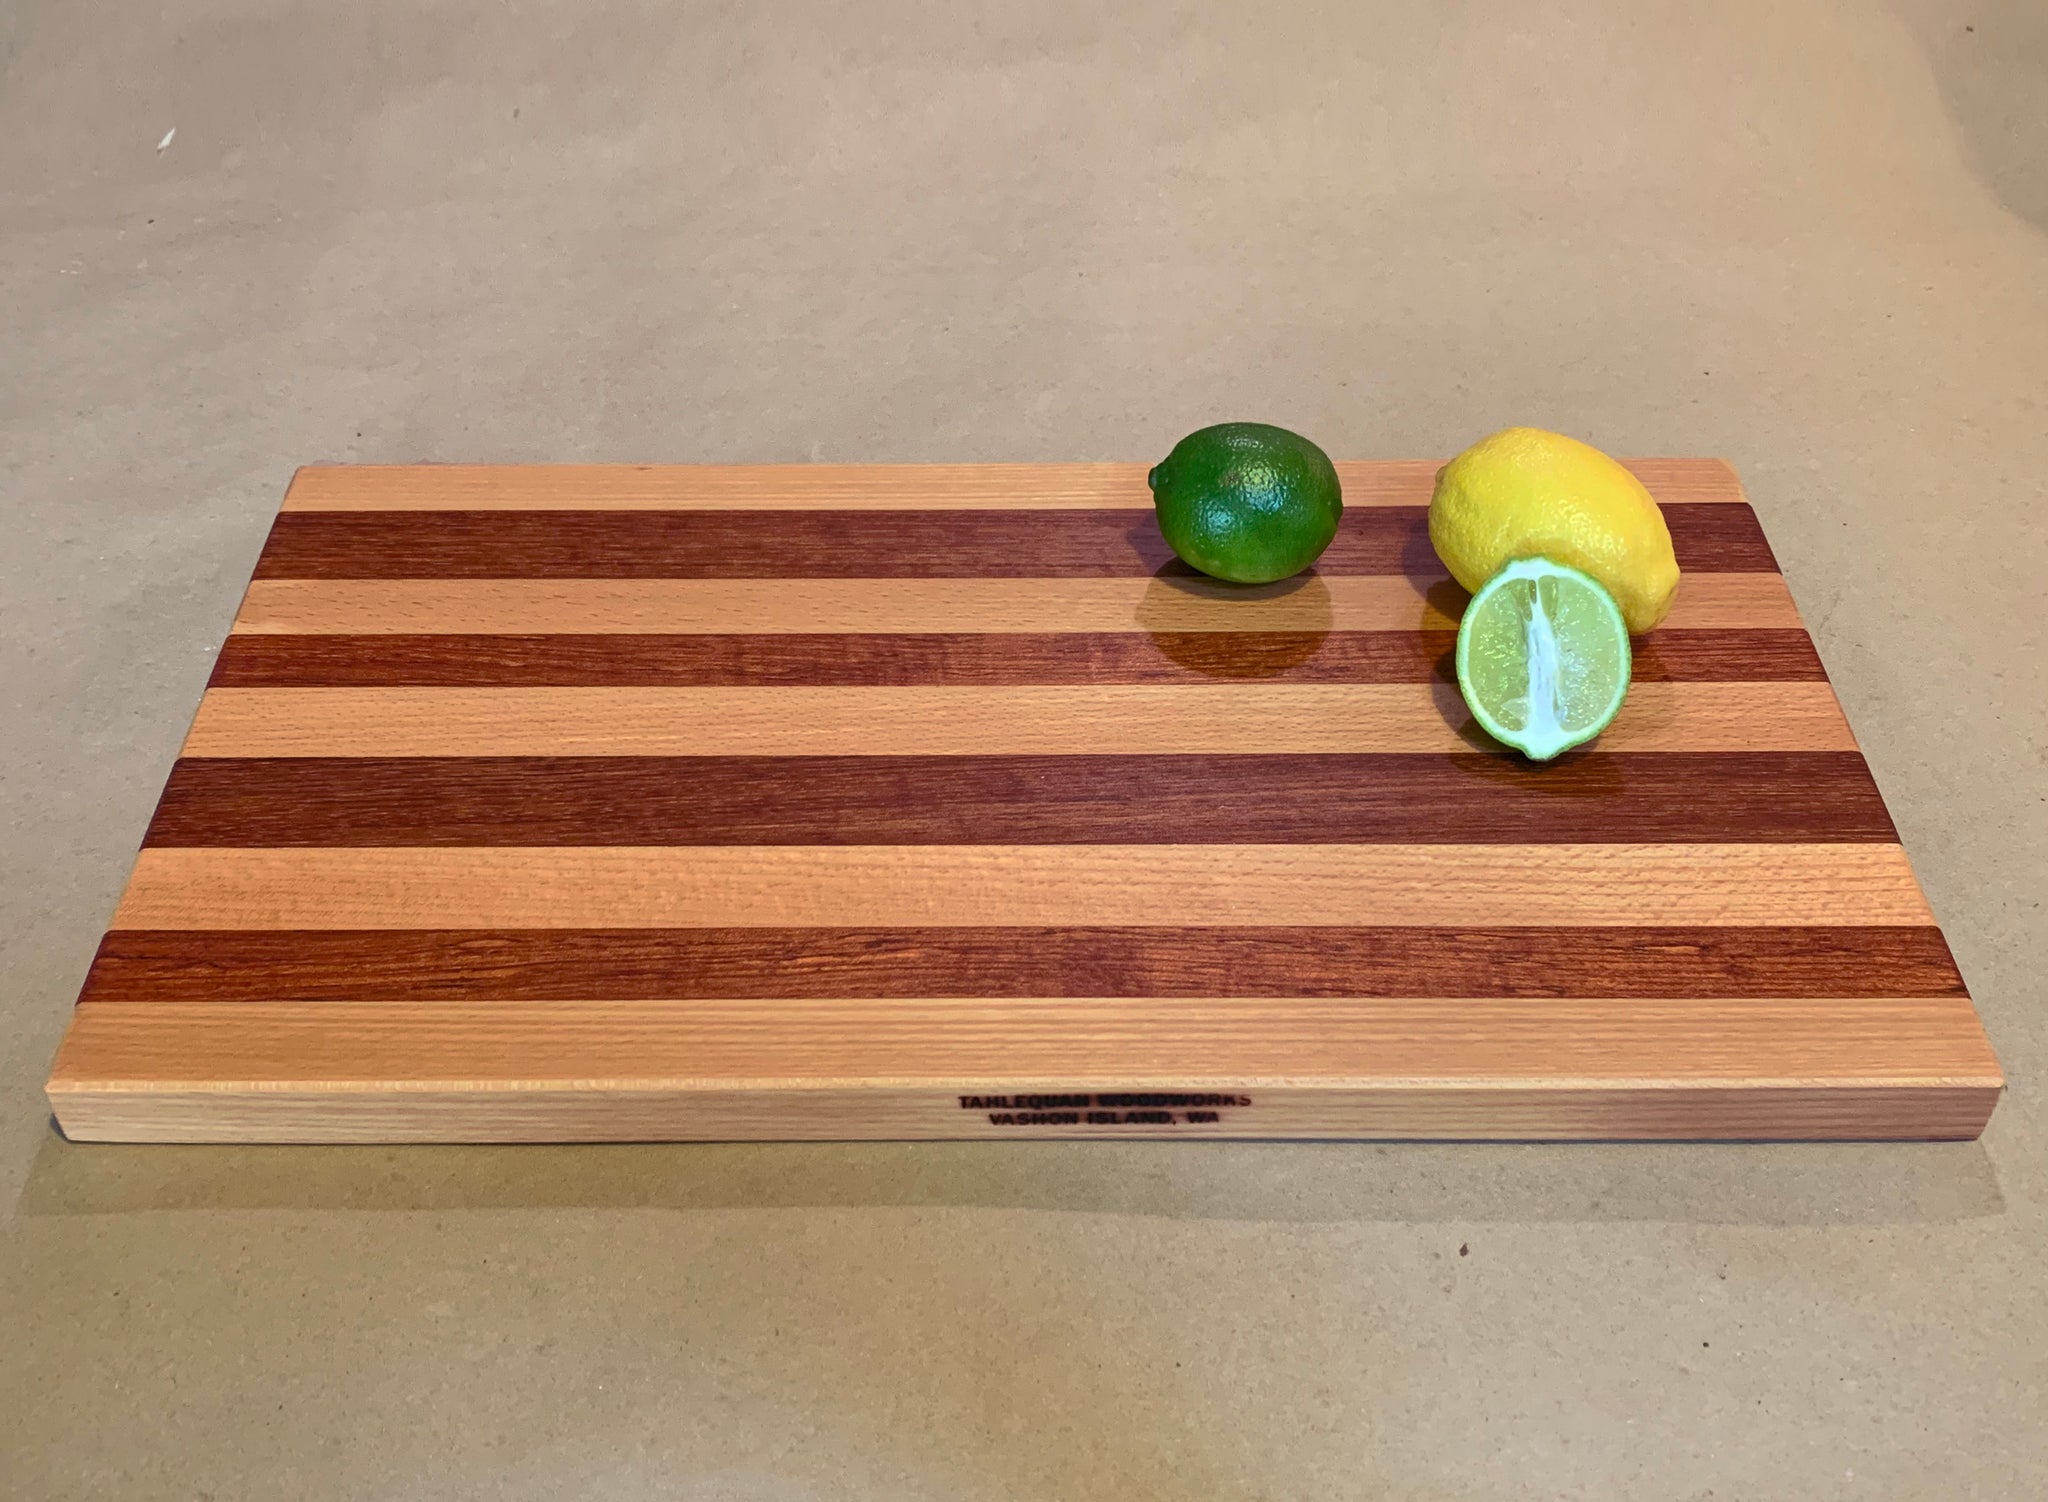 Wooden Cutting Board - Large 9 Stripes